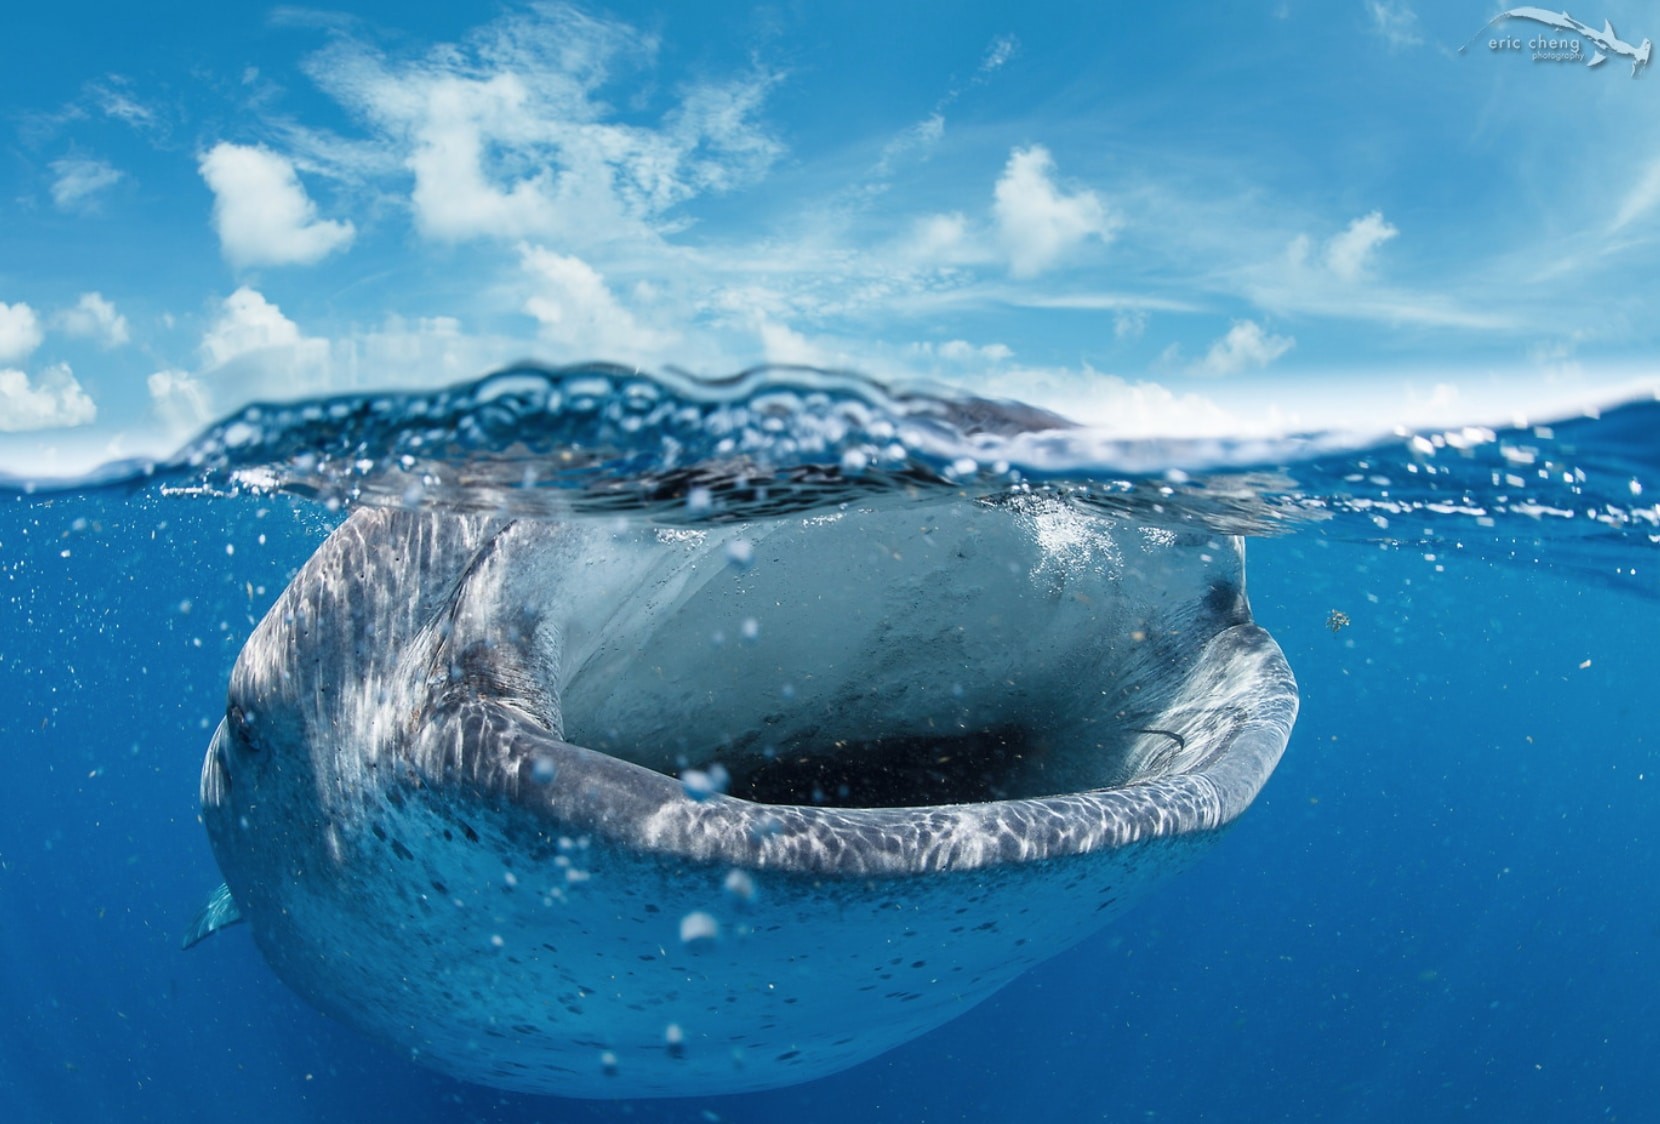 One Space Left For Whale Shark Photography Trip (Photo credit: Eric Cheng Photography)